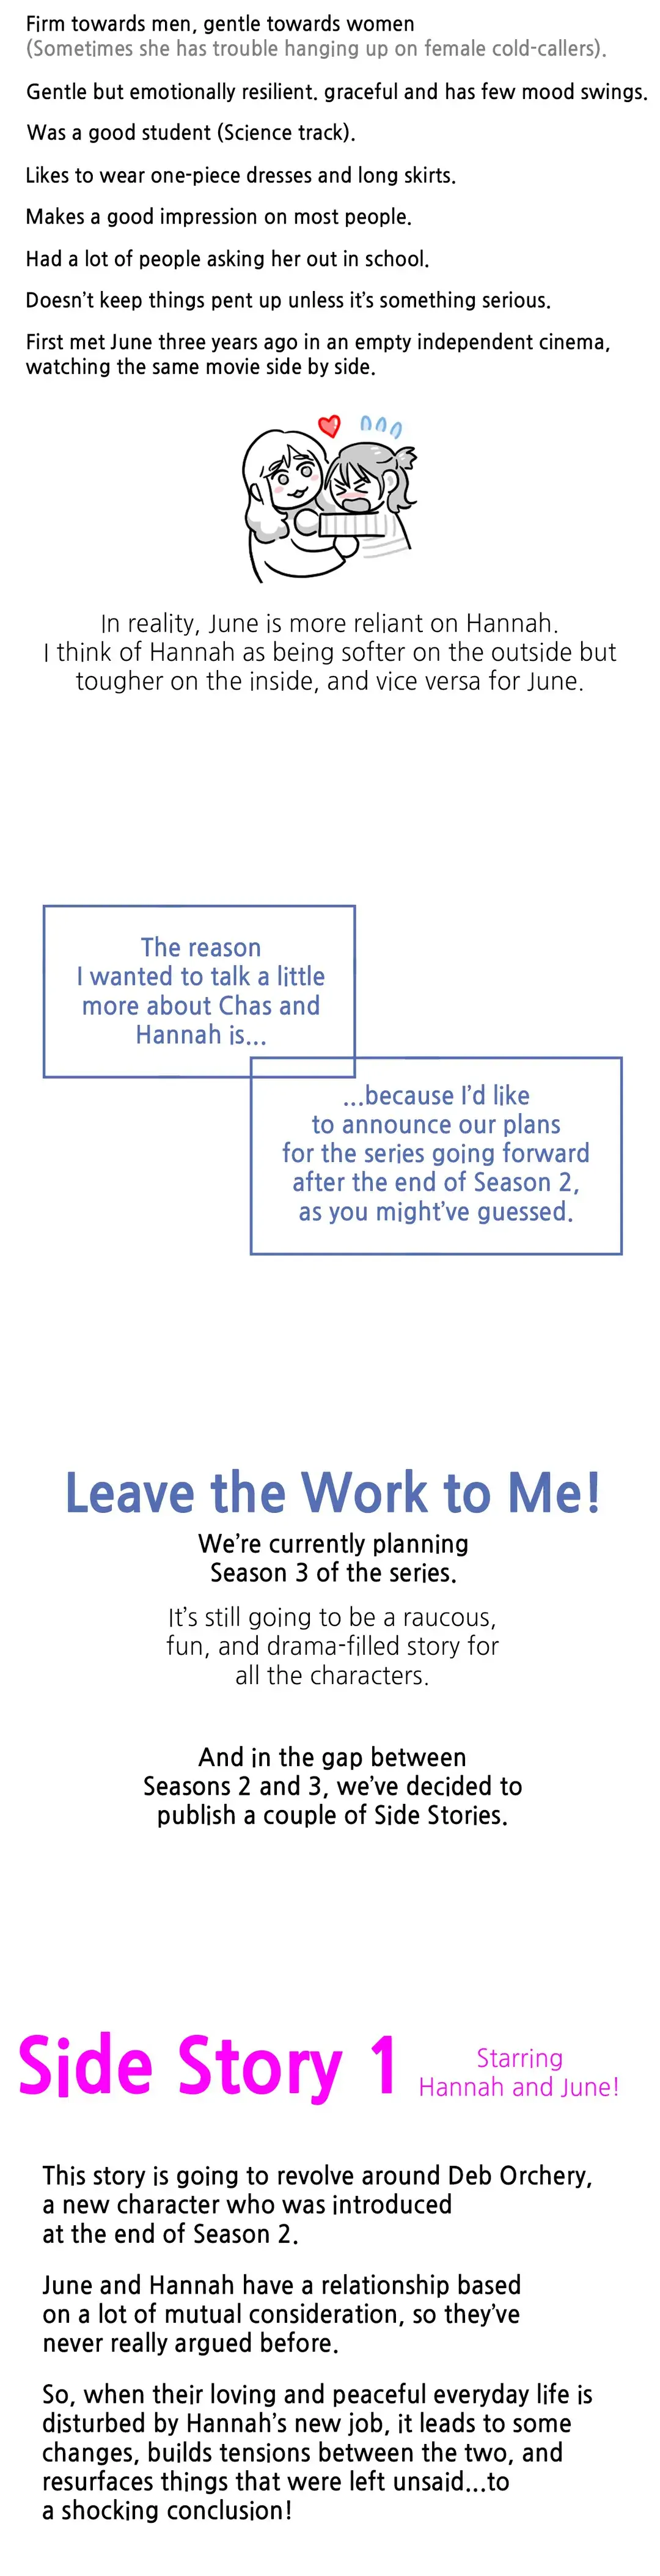 Leave the work to me! image